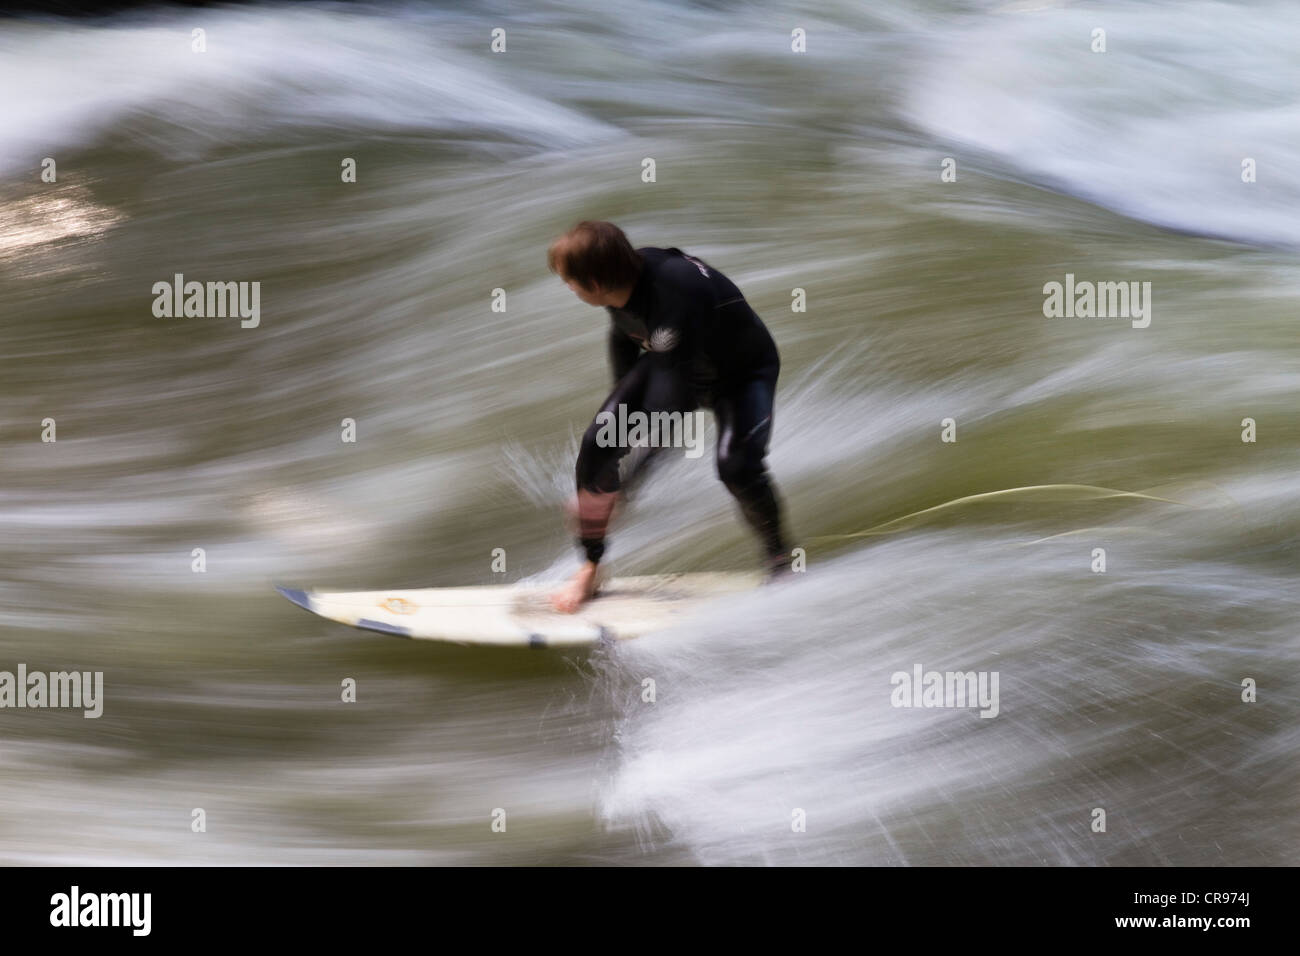 Surfer on a wave in the Eisbach, English Garden, Munich, Upper Bavaria, Bavaria, Germany, Europe Stock Photo